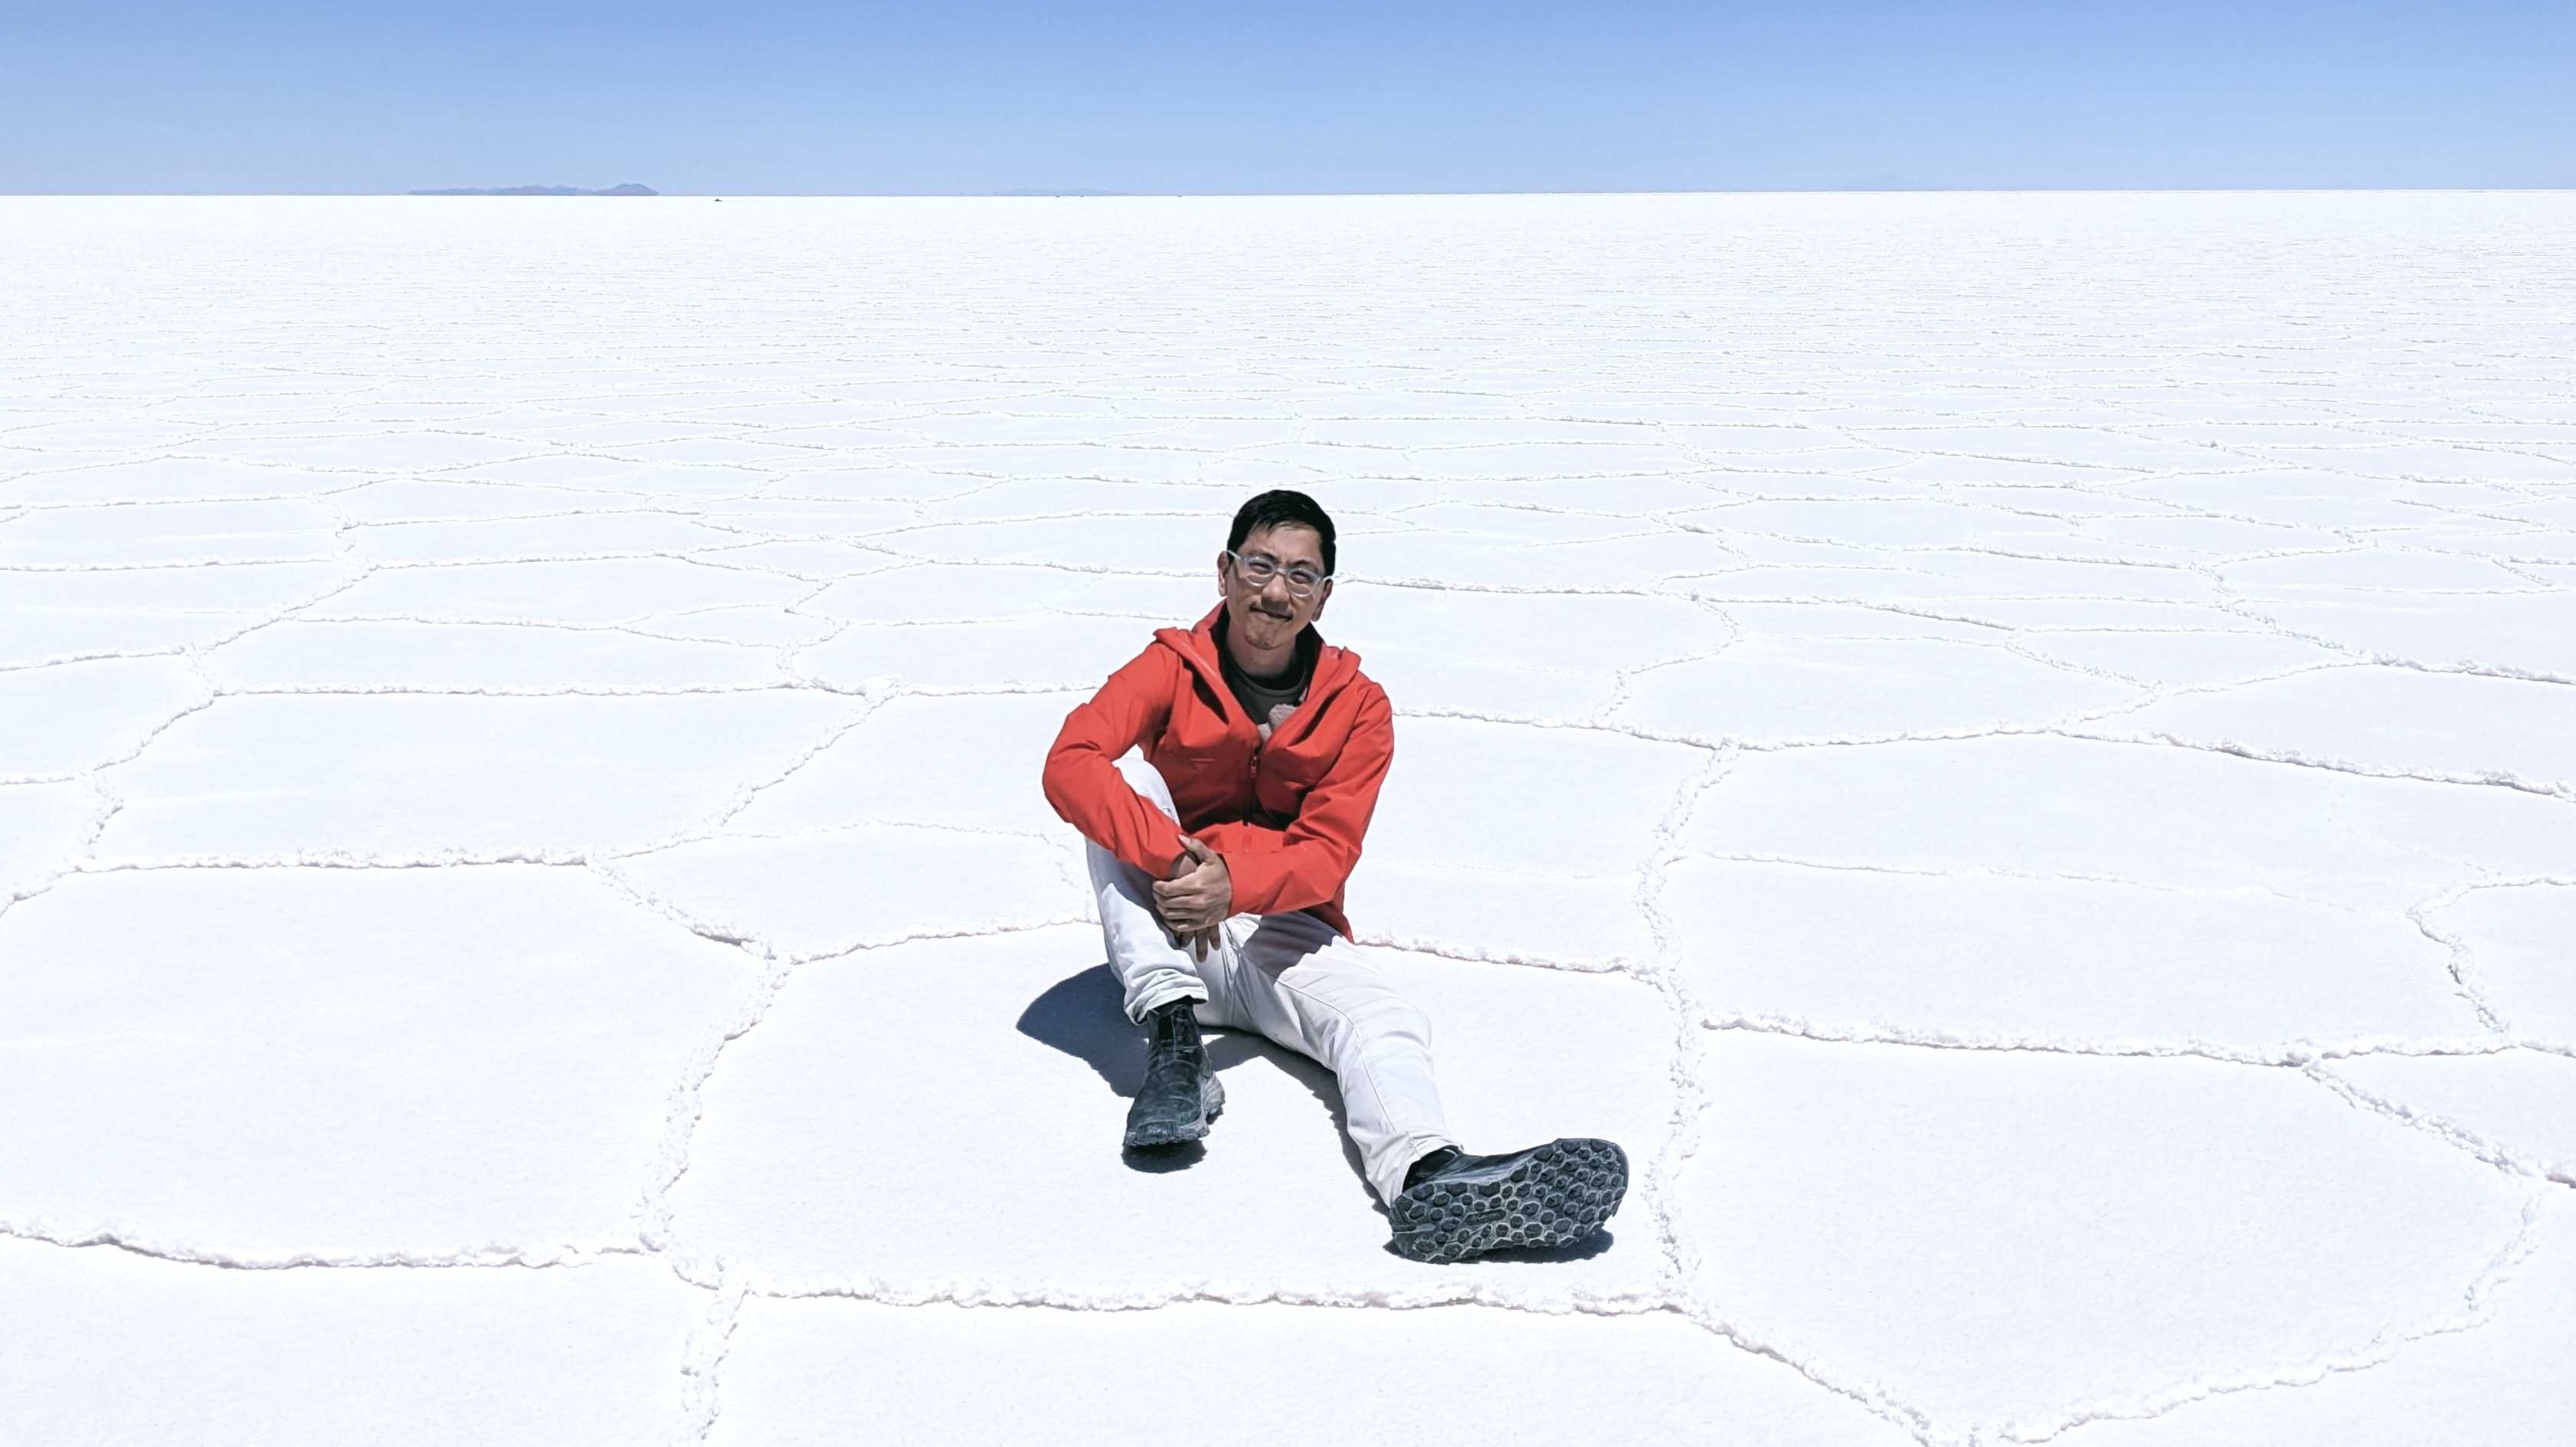 Henry in a red coat and white jeans sitting on the ground of the Uyuni Salt Flats in Bolivia, a barren stark white landscape against a clear blue sky.